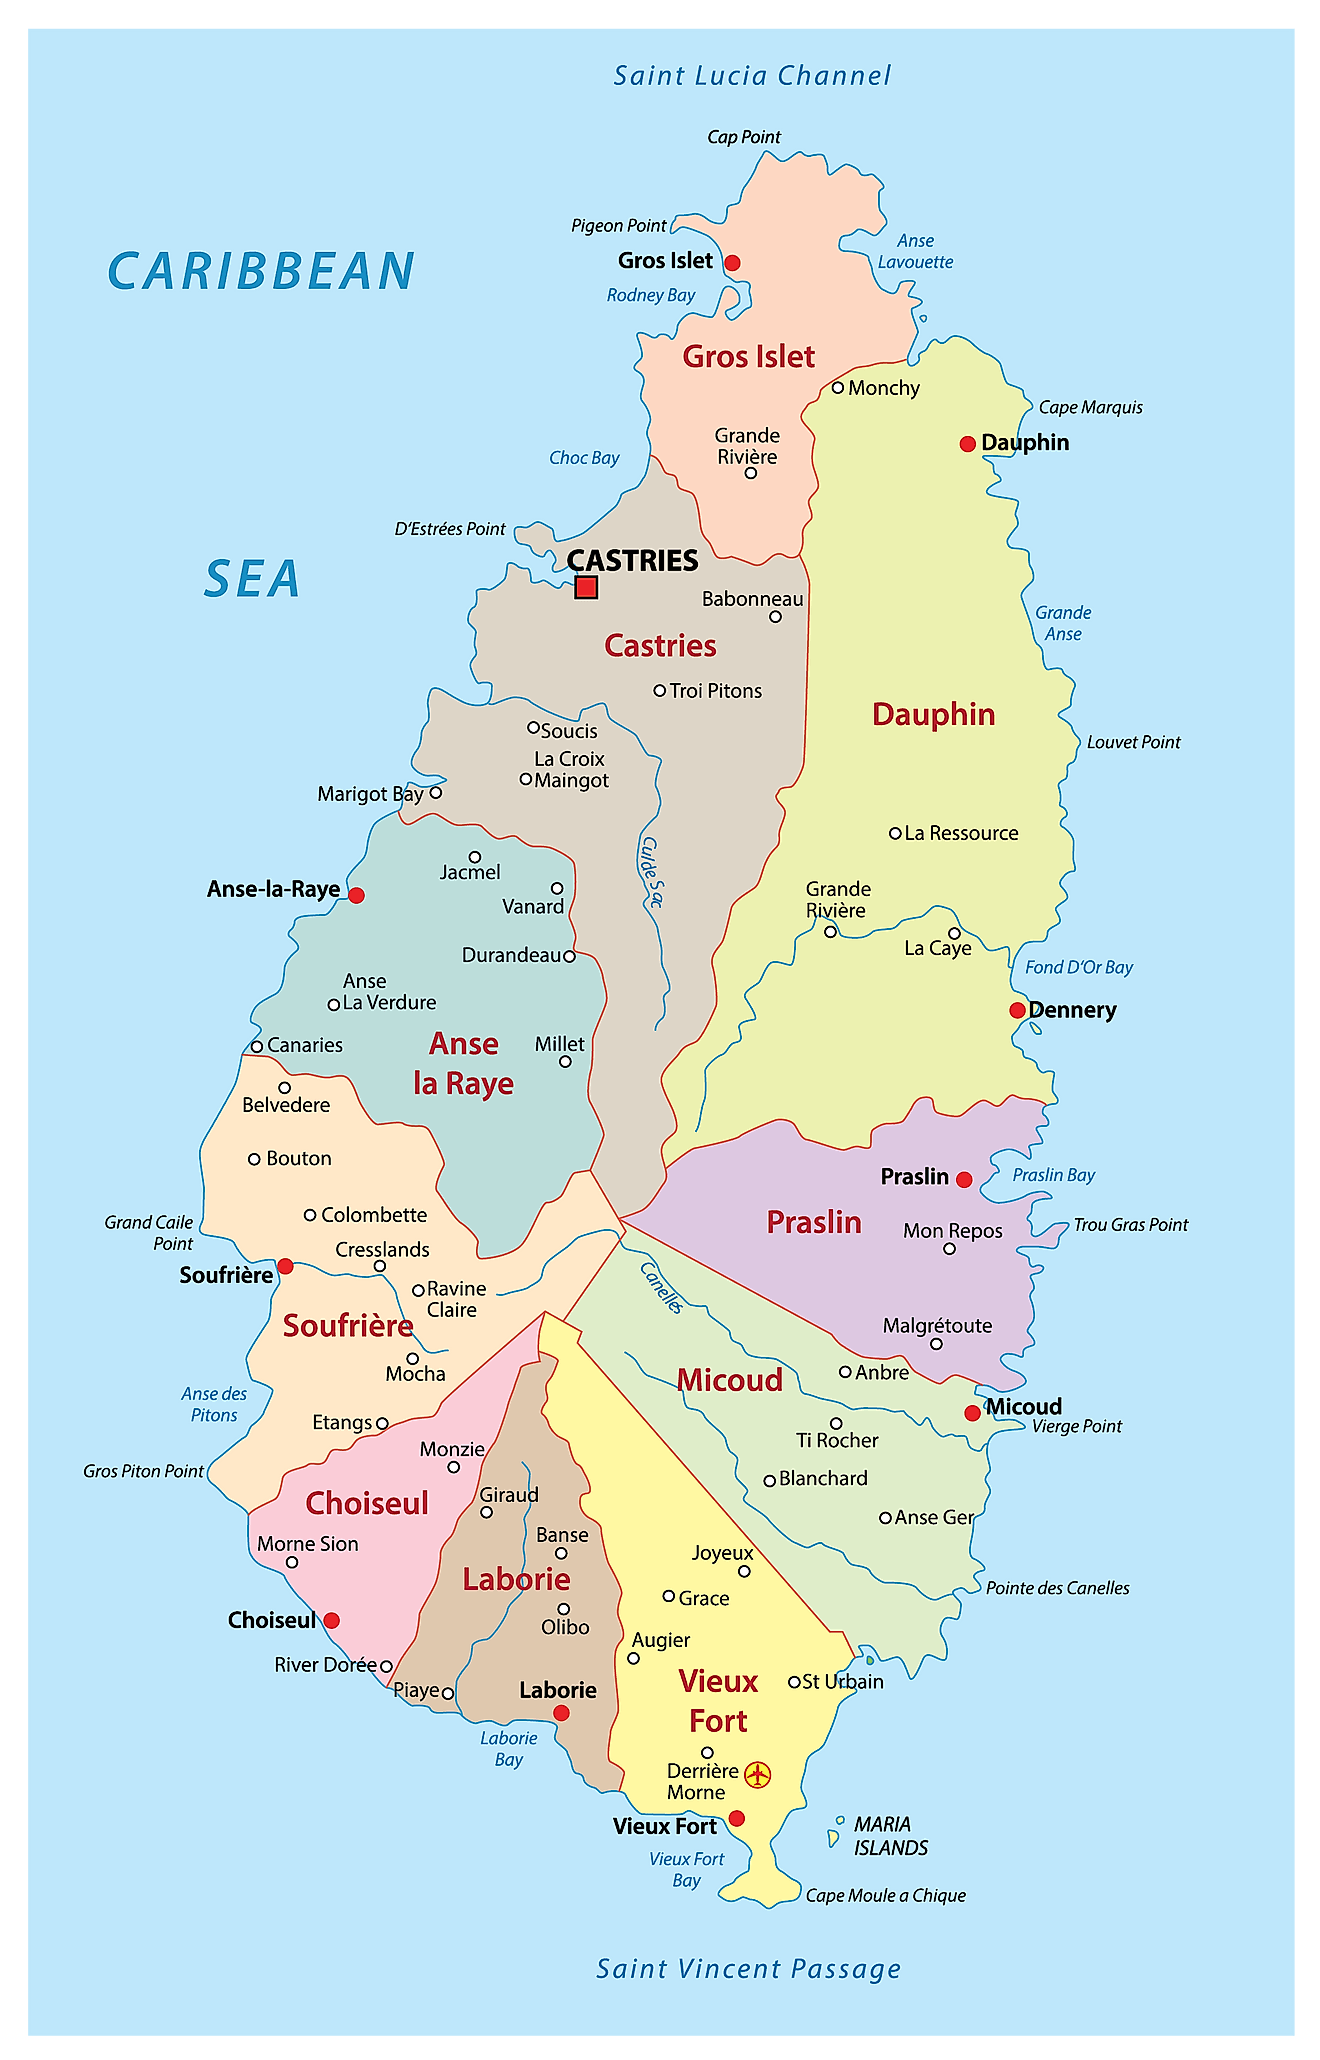 Districts of Saint Lucia Map